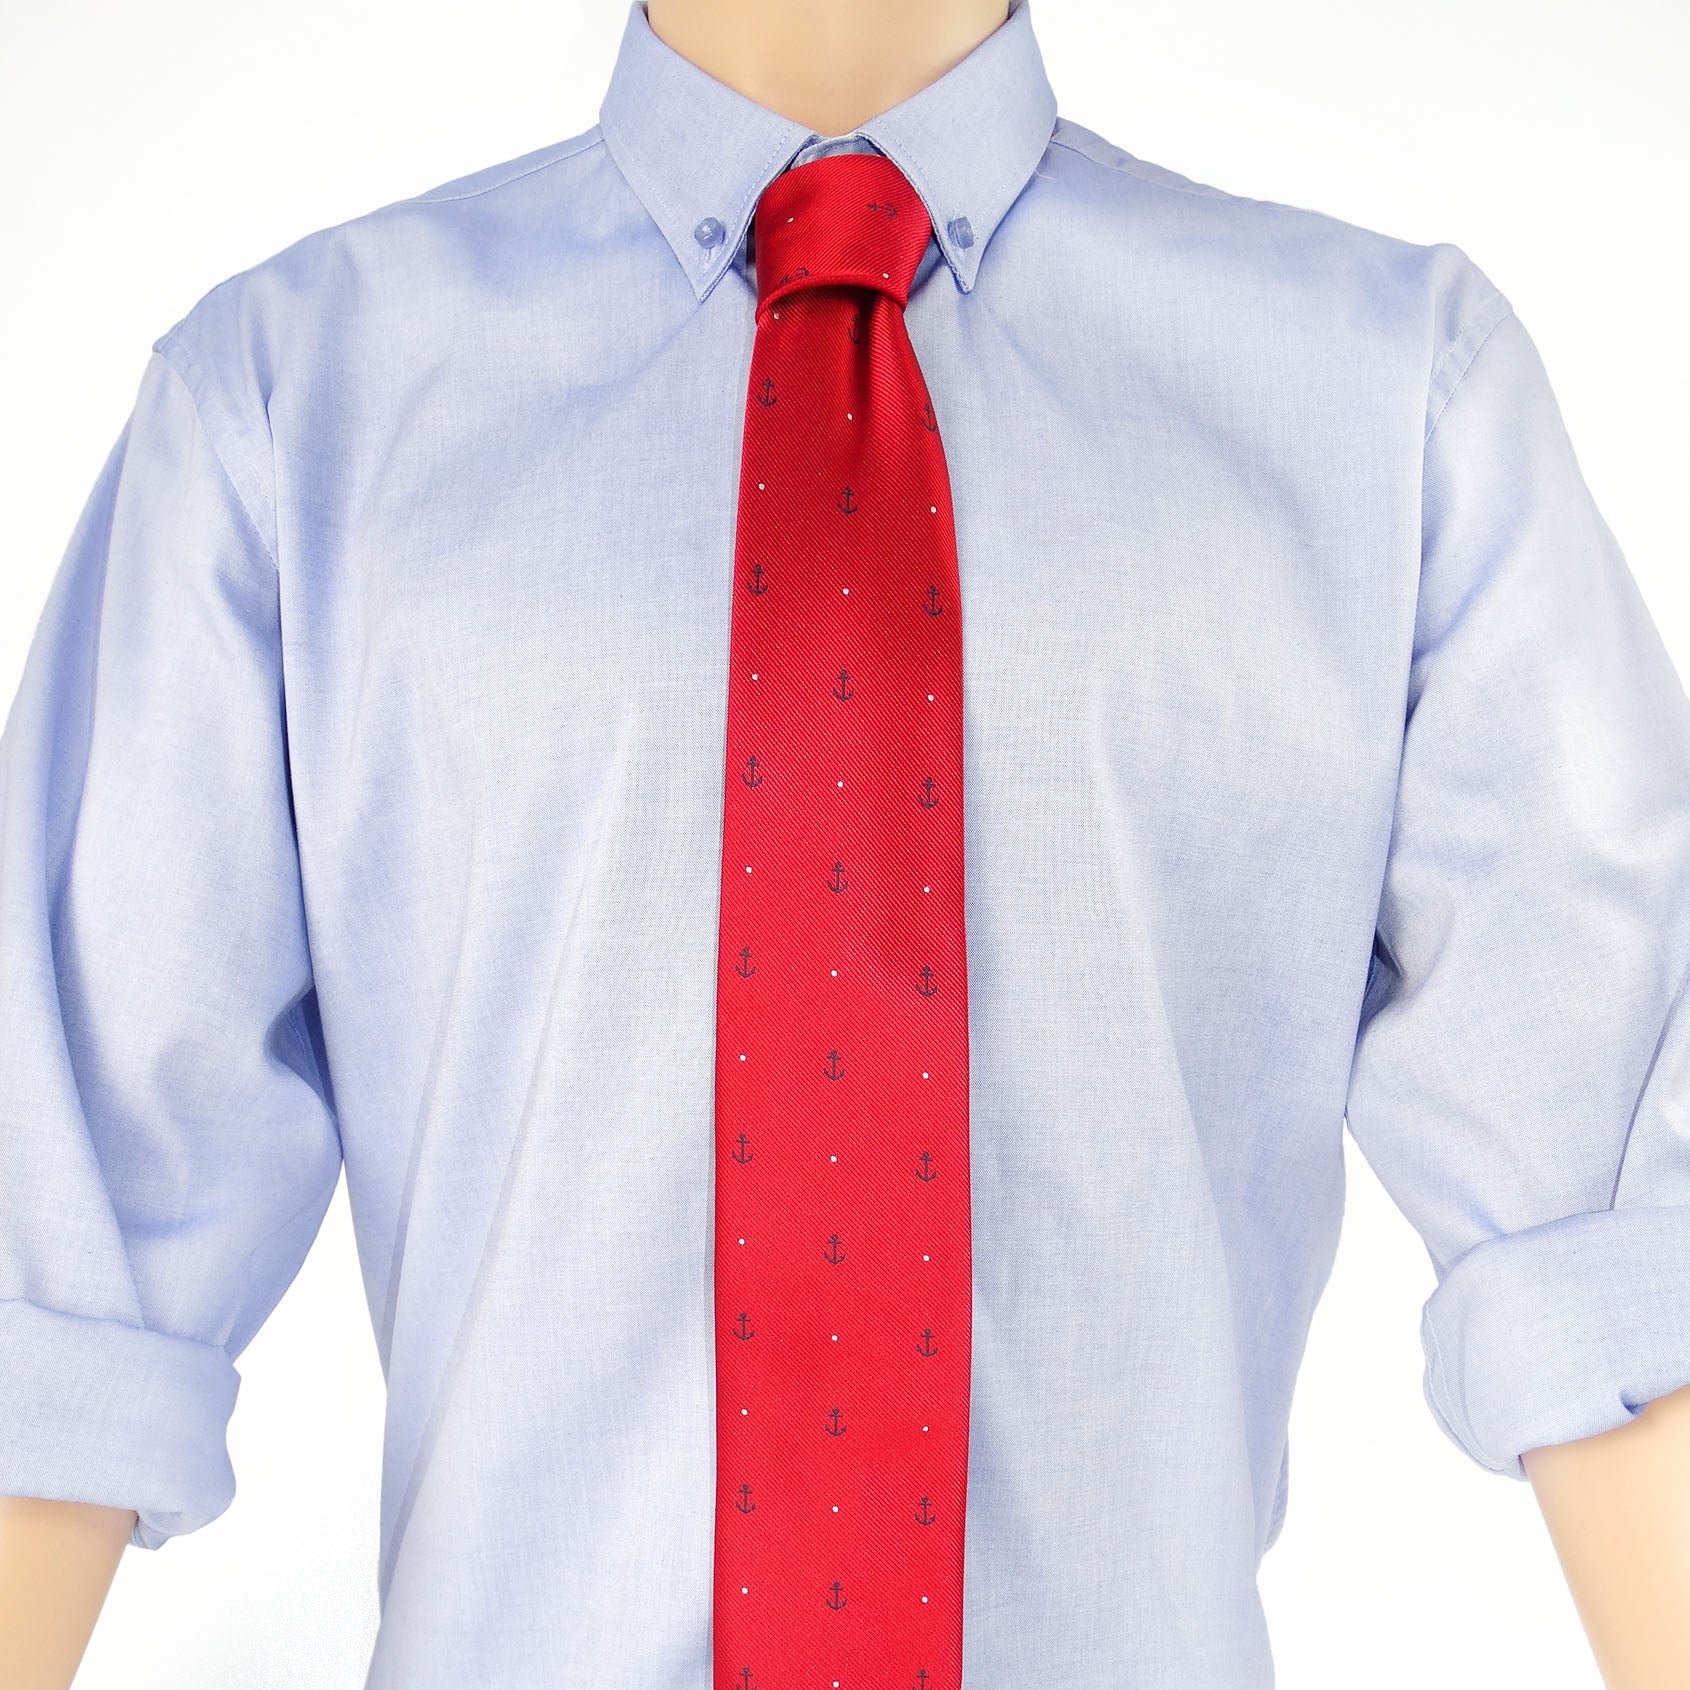 Maritime red tie with anchors